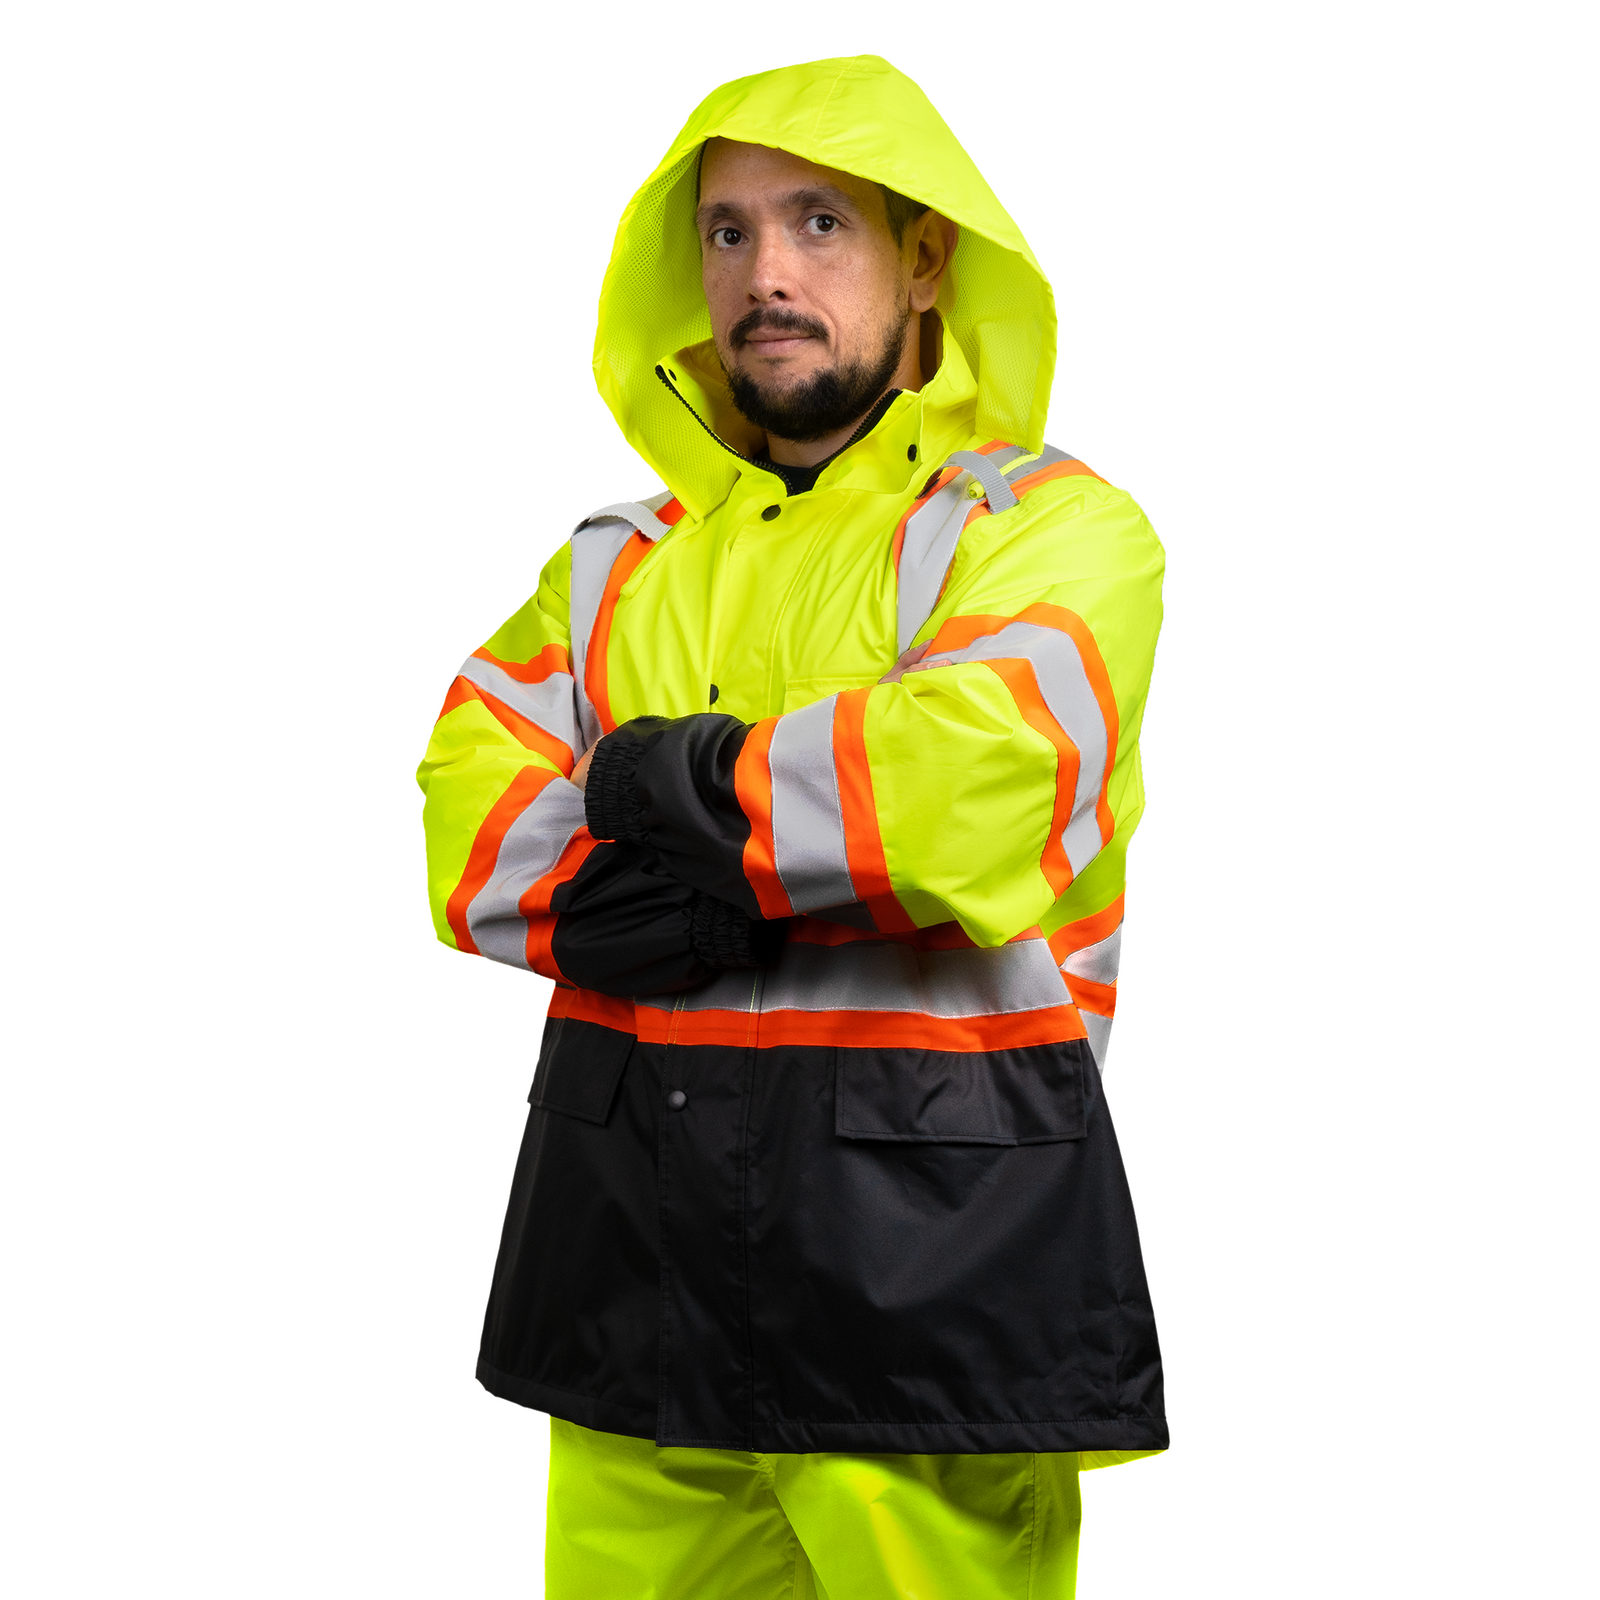 Worker wearing the hi vis two tone yellow ANSI compliant safety rain jacket with x reflective stripes on the back and hideaway hoodie